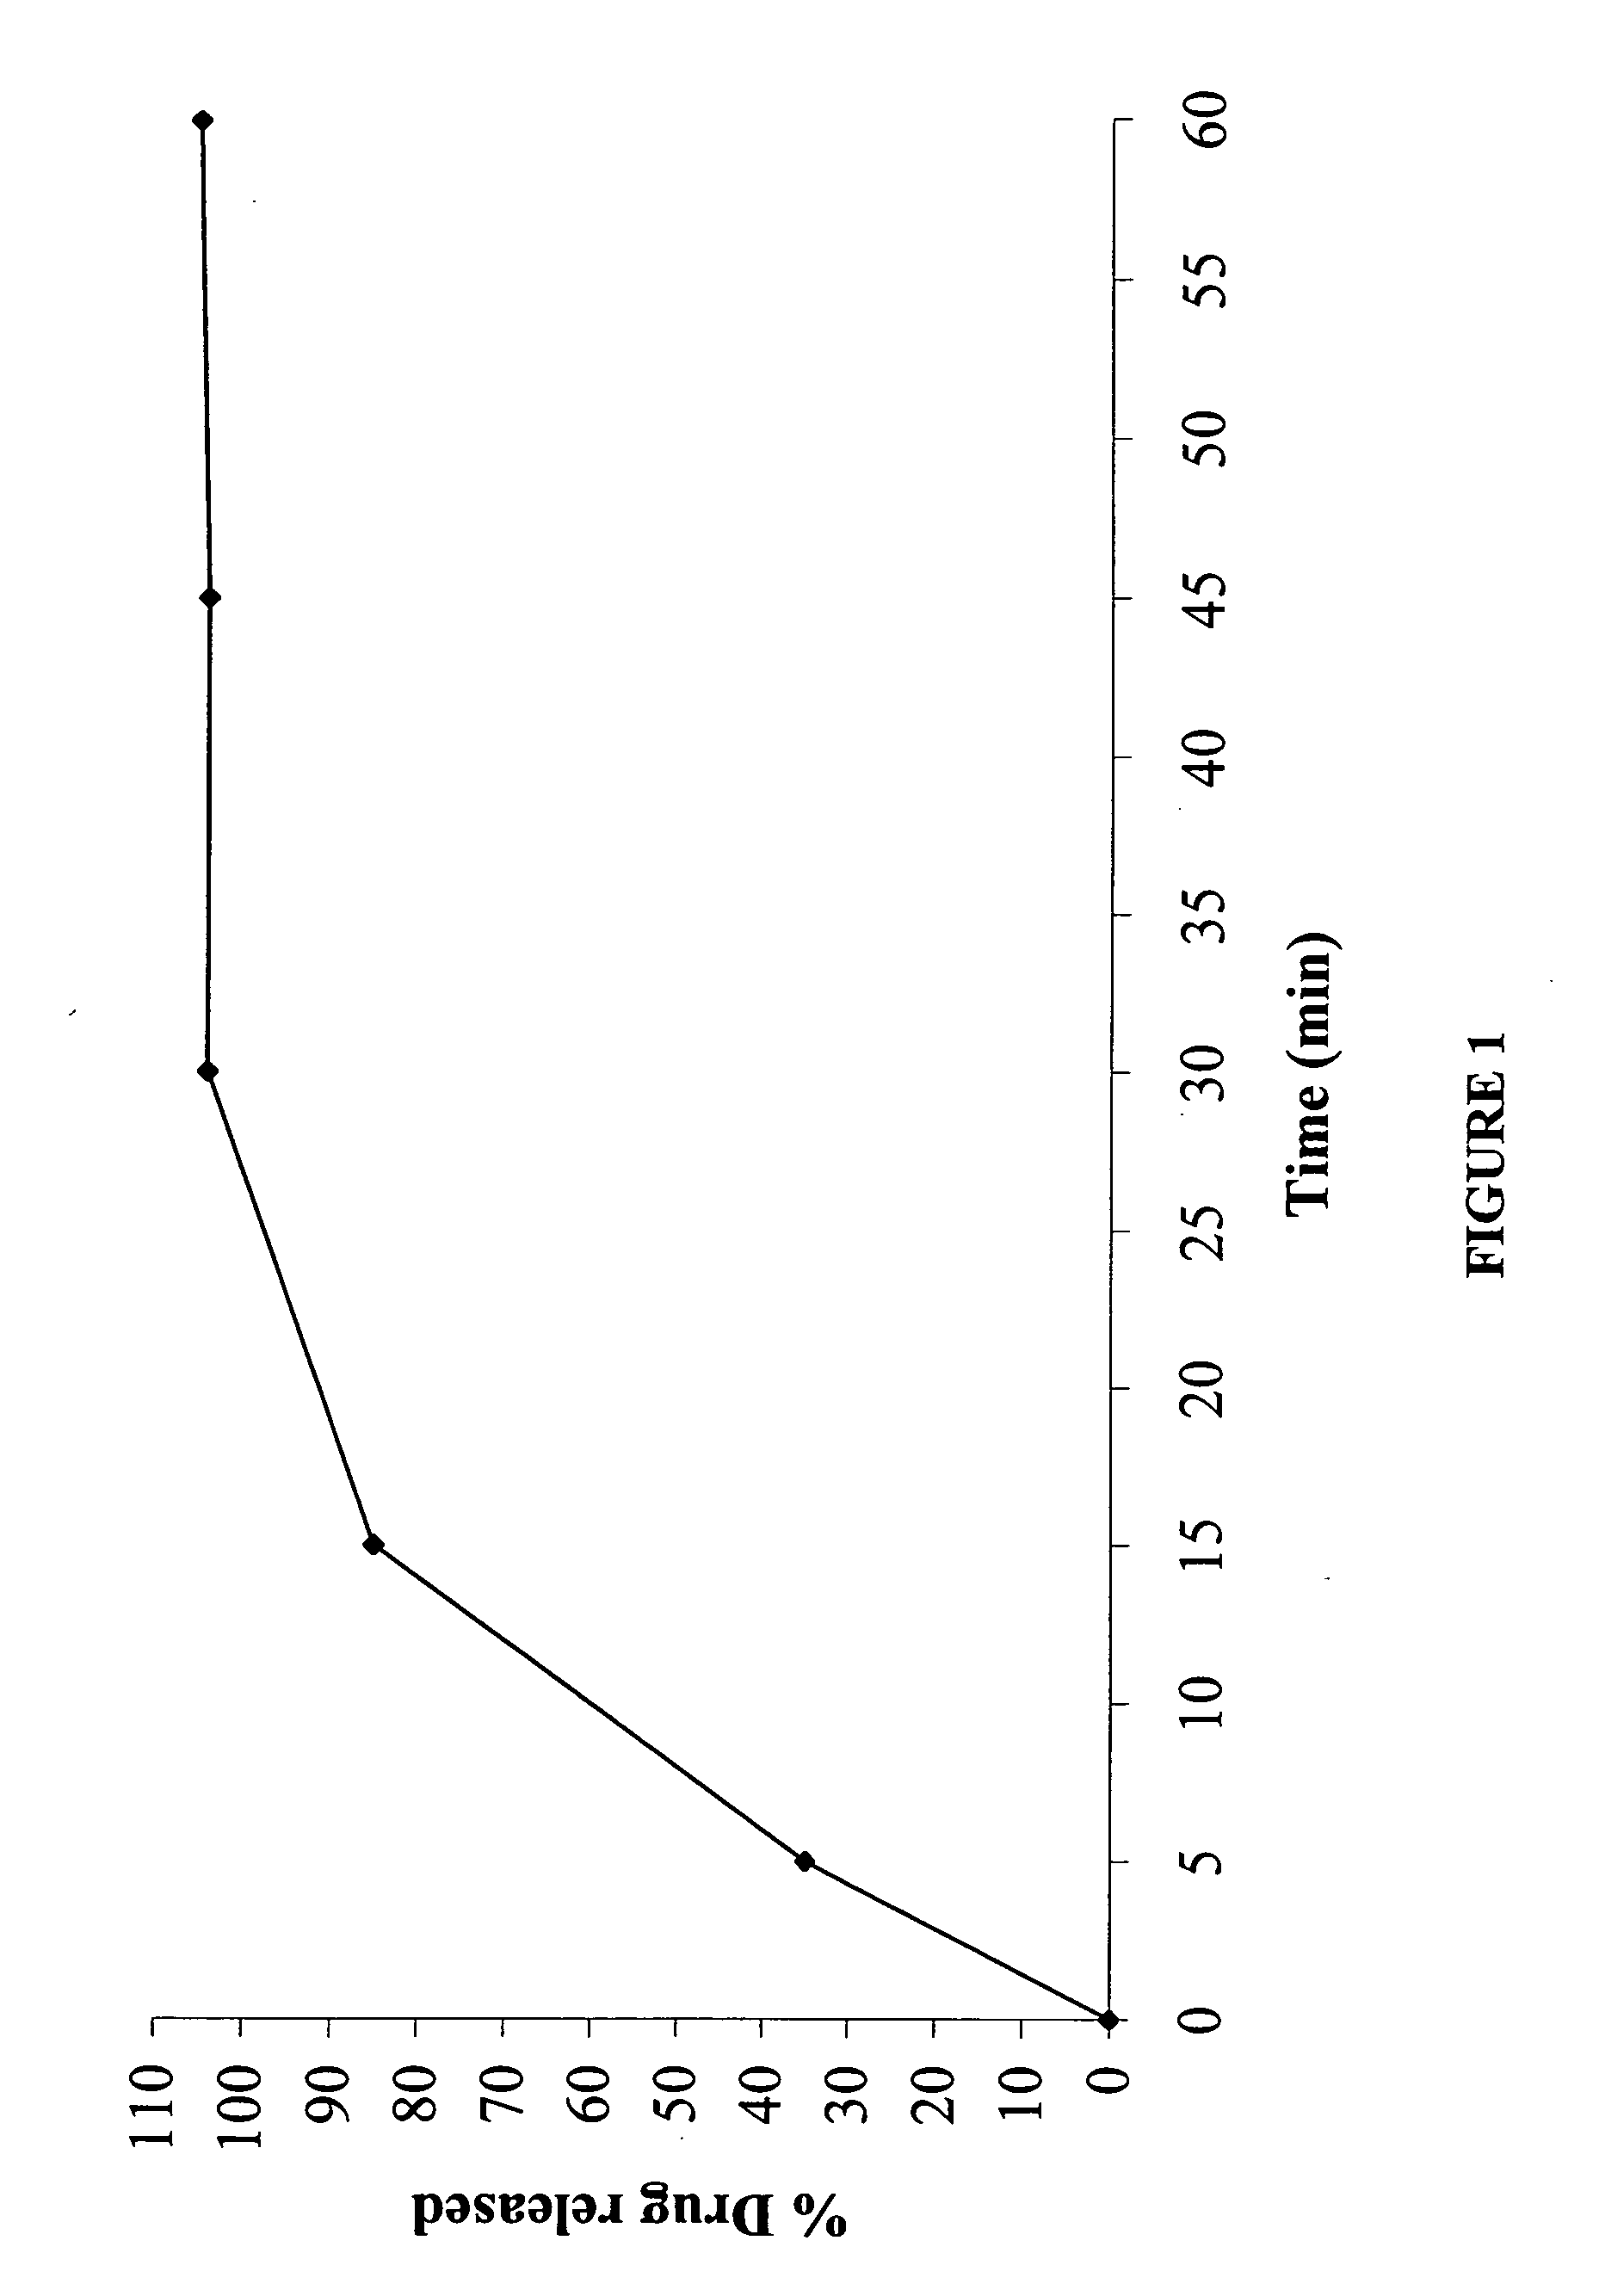 Modified-release compositions of at least one form of venlafaxine